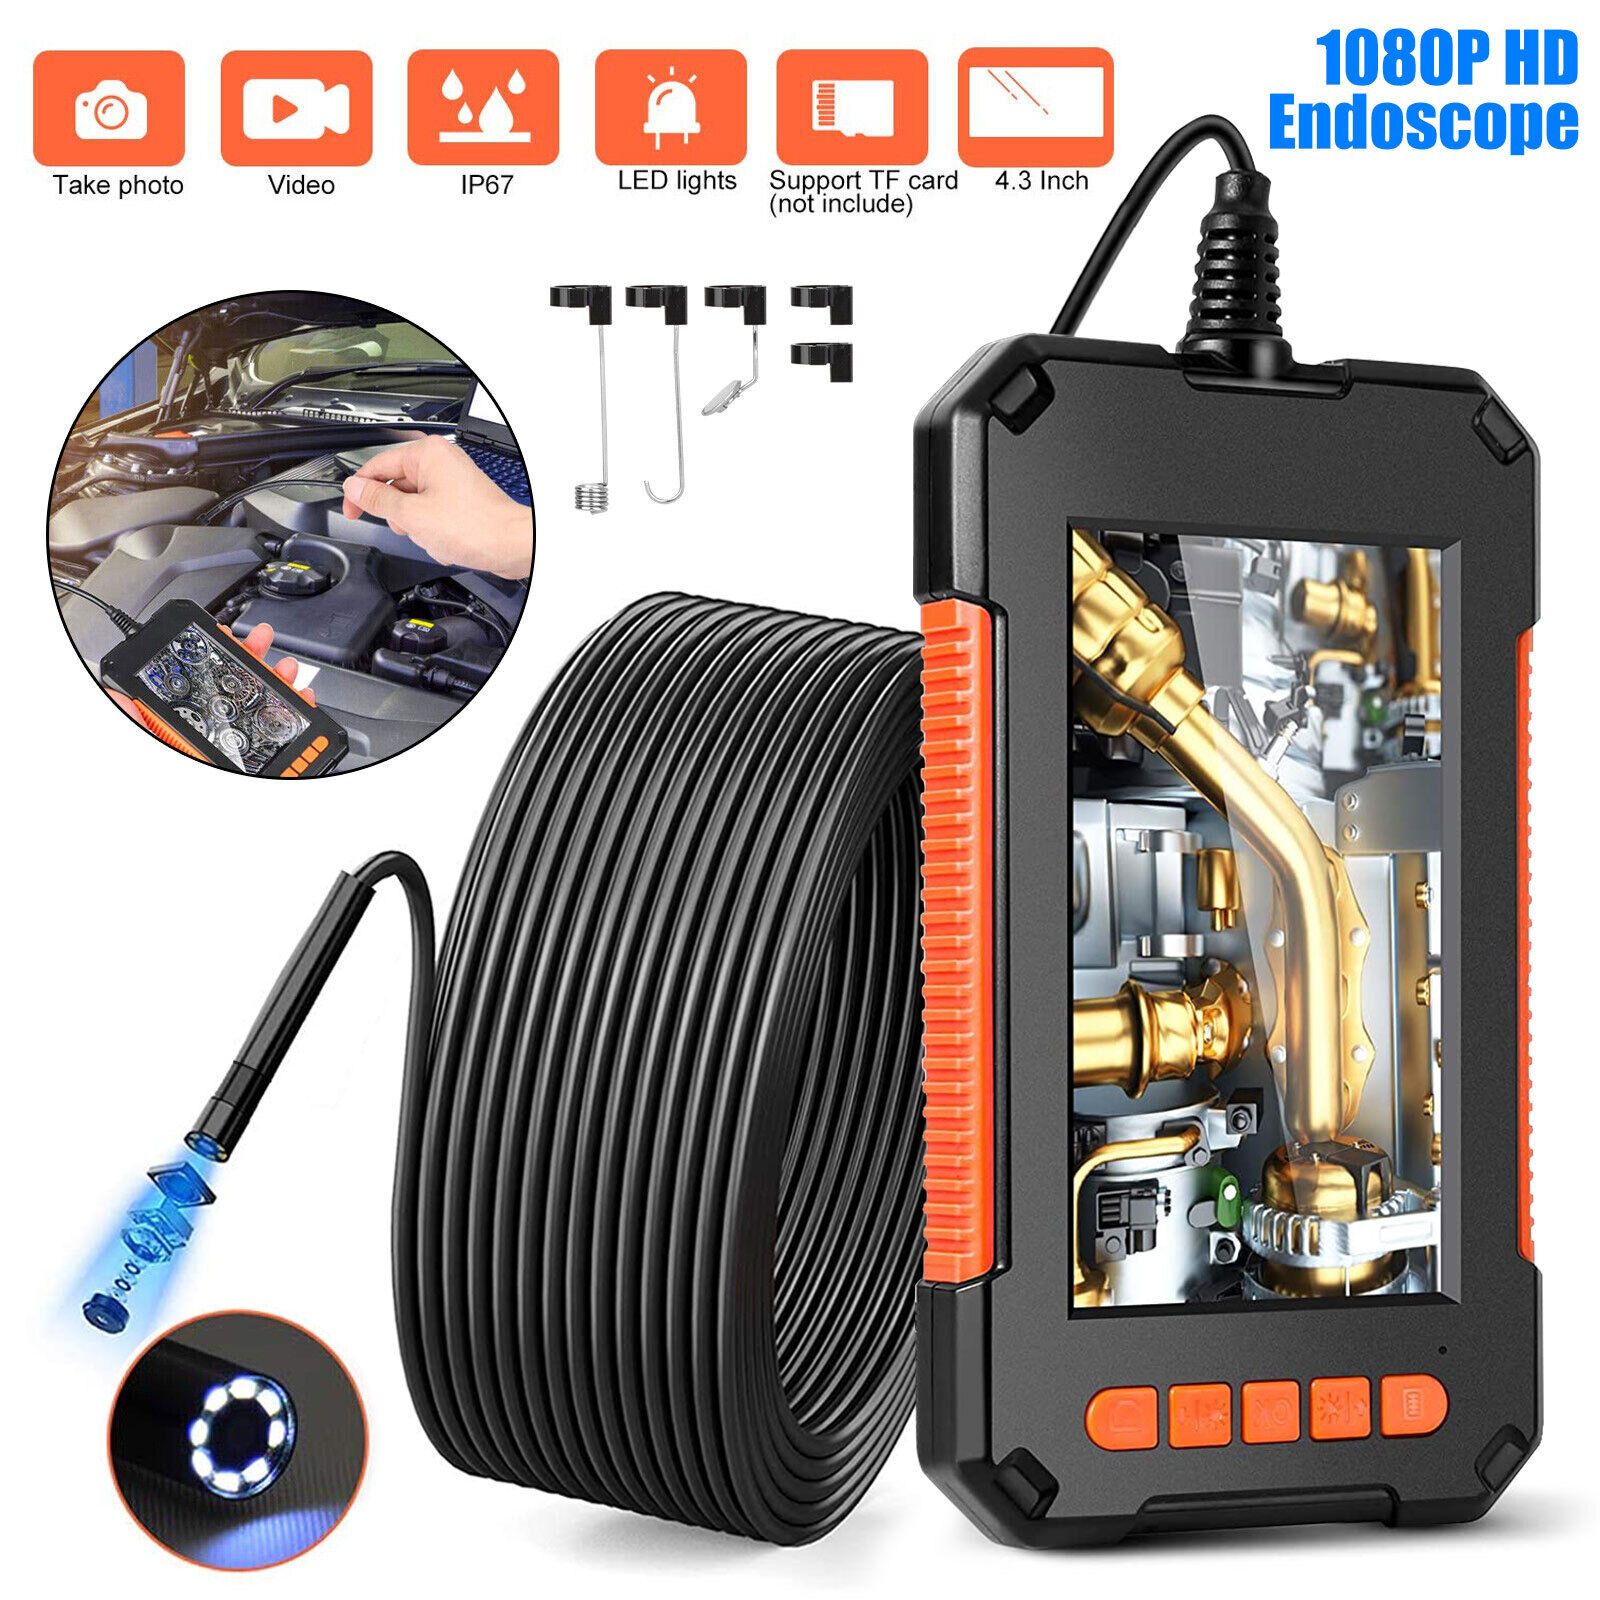 4.3inch HD LED Industrial Endoscope Borescope 1080P 8mm Inspection Snake Camera